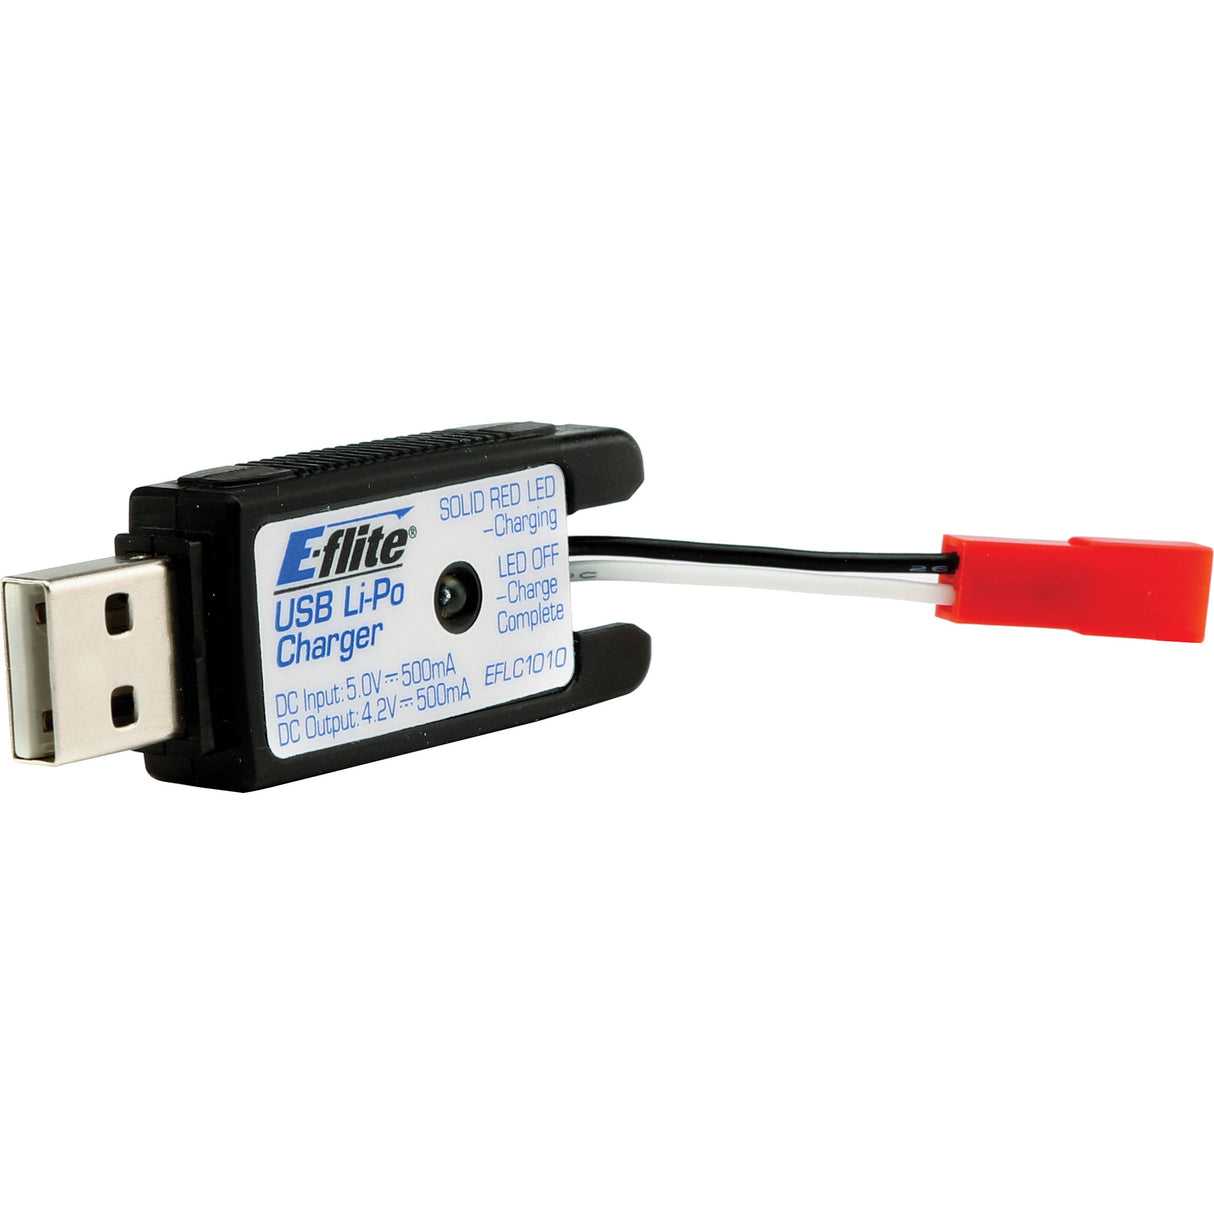 Compact USB LiPo charger for RC models. Small black device with LED indicator and JST plug for effortless battery charging.